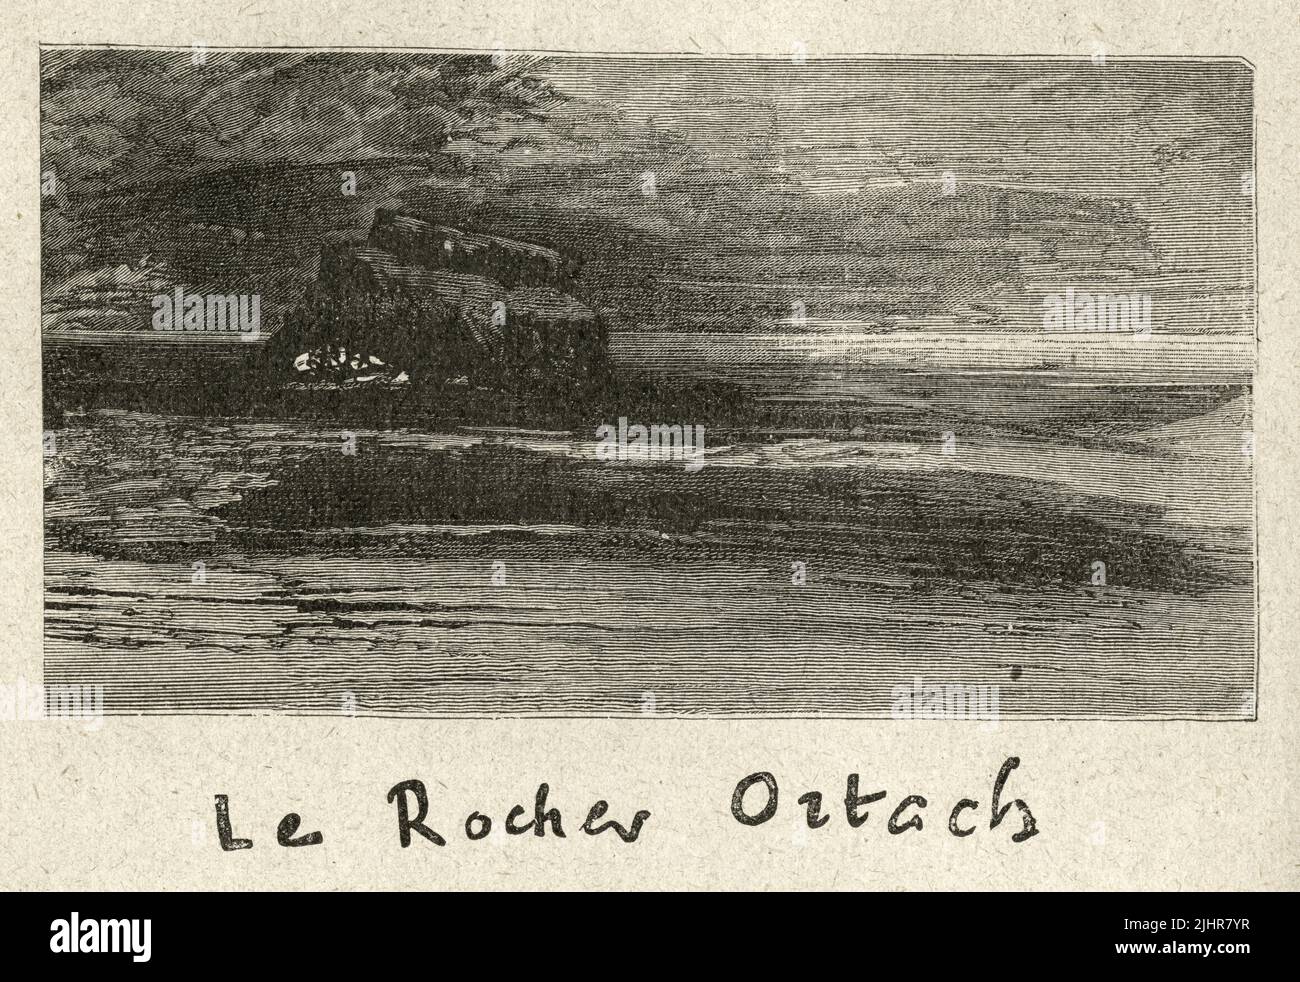 The Ortach rock: 'For it has been discovered, and is now well established, that the lonely inhabitant of the rock is not a saint, but a devil.' First part, Book I, chapter II.  Illustrator: Victor Hugo. Illustration from a set of nearly 150 woodcuts published in the Volume XI of Victor Hugo's 'Oeuvres Complètes' including 'Les Travailleurs de la Mer' ('Toilers of the Sea') - written in 1866. Book published in 1906 by the Société d'éditions Littéraires et Artistiques, Librairie Paul Ollendorff. Stock Photo